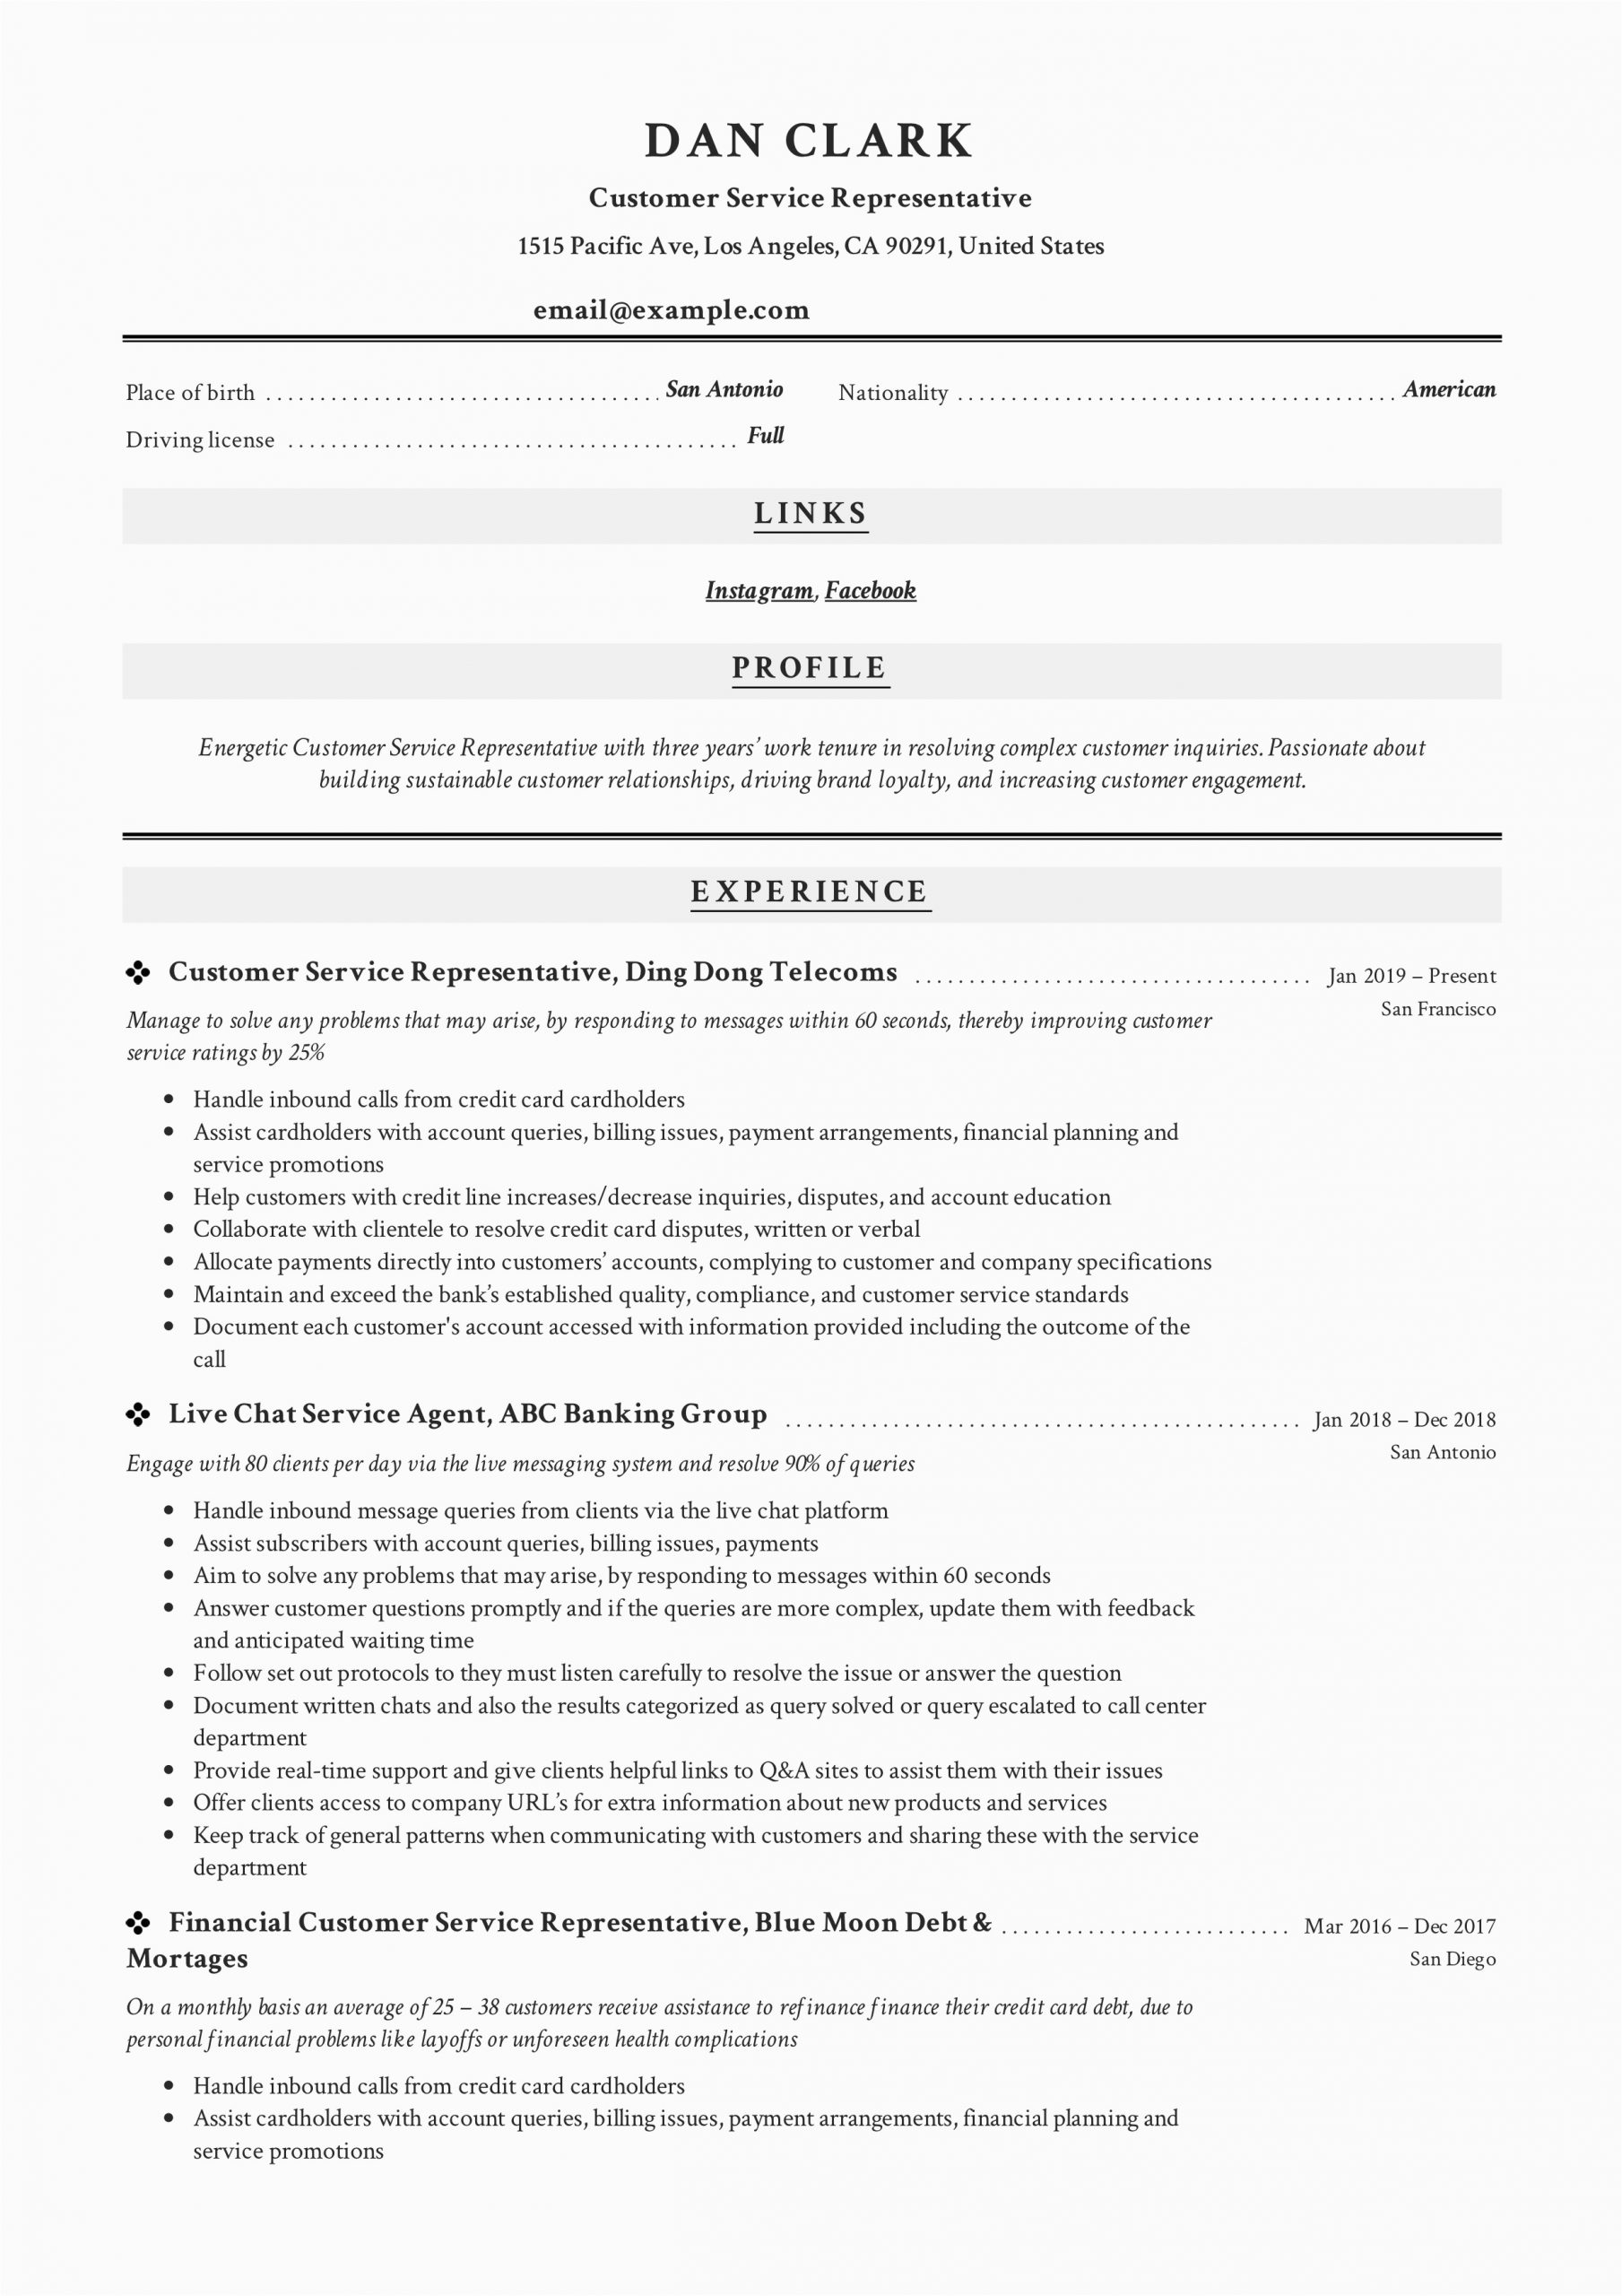 Resume Template for Customer Service Representative Customer Service Representative Resume